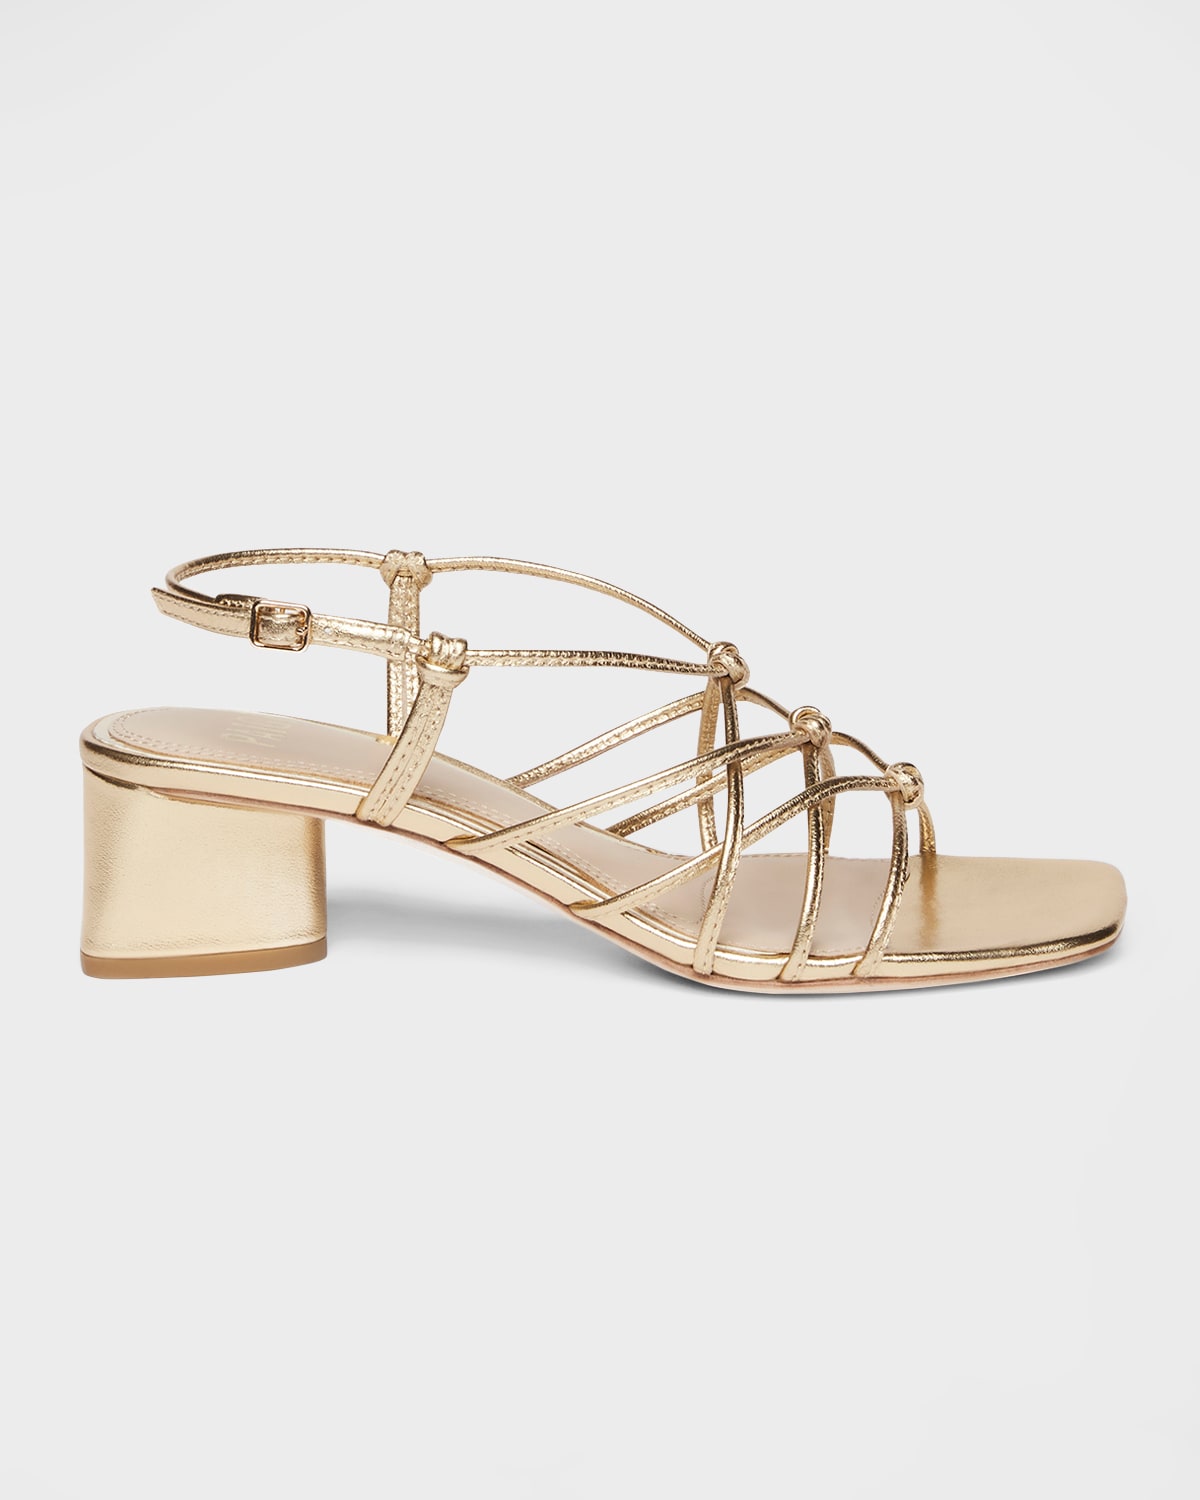 Gianna Knotted Metallic Slingback Sandals